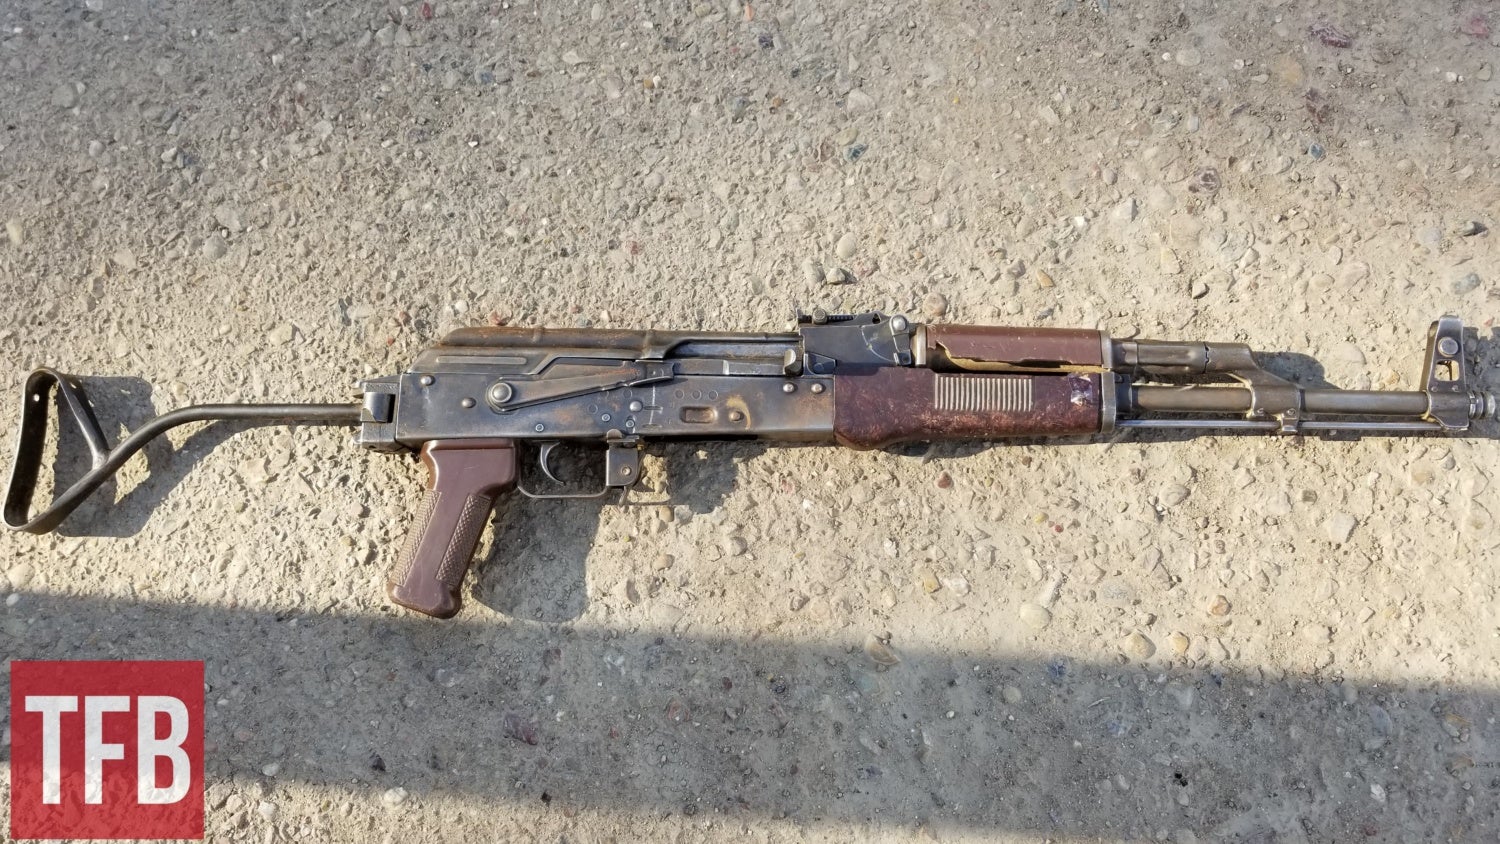 Typical workhorse East German AK with rust and chipped handguard.